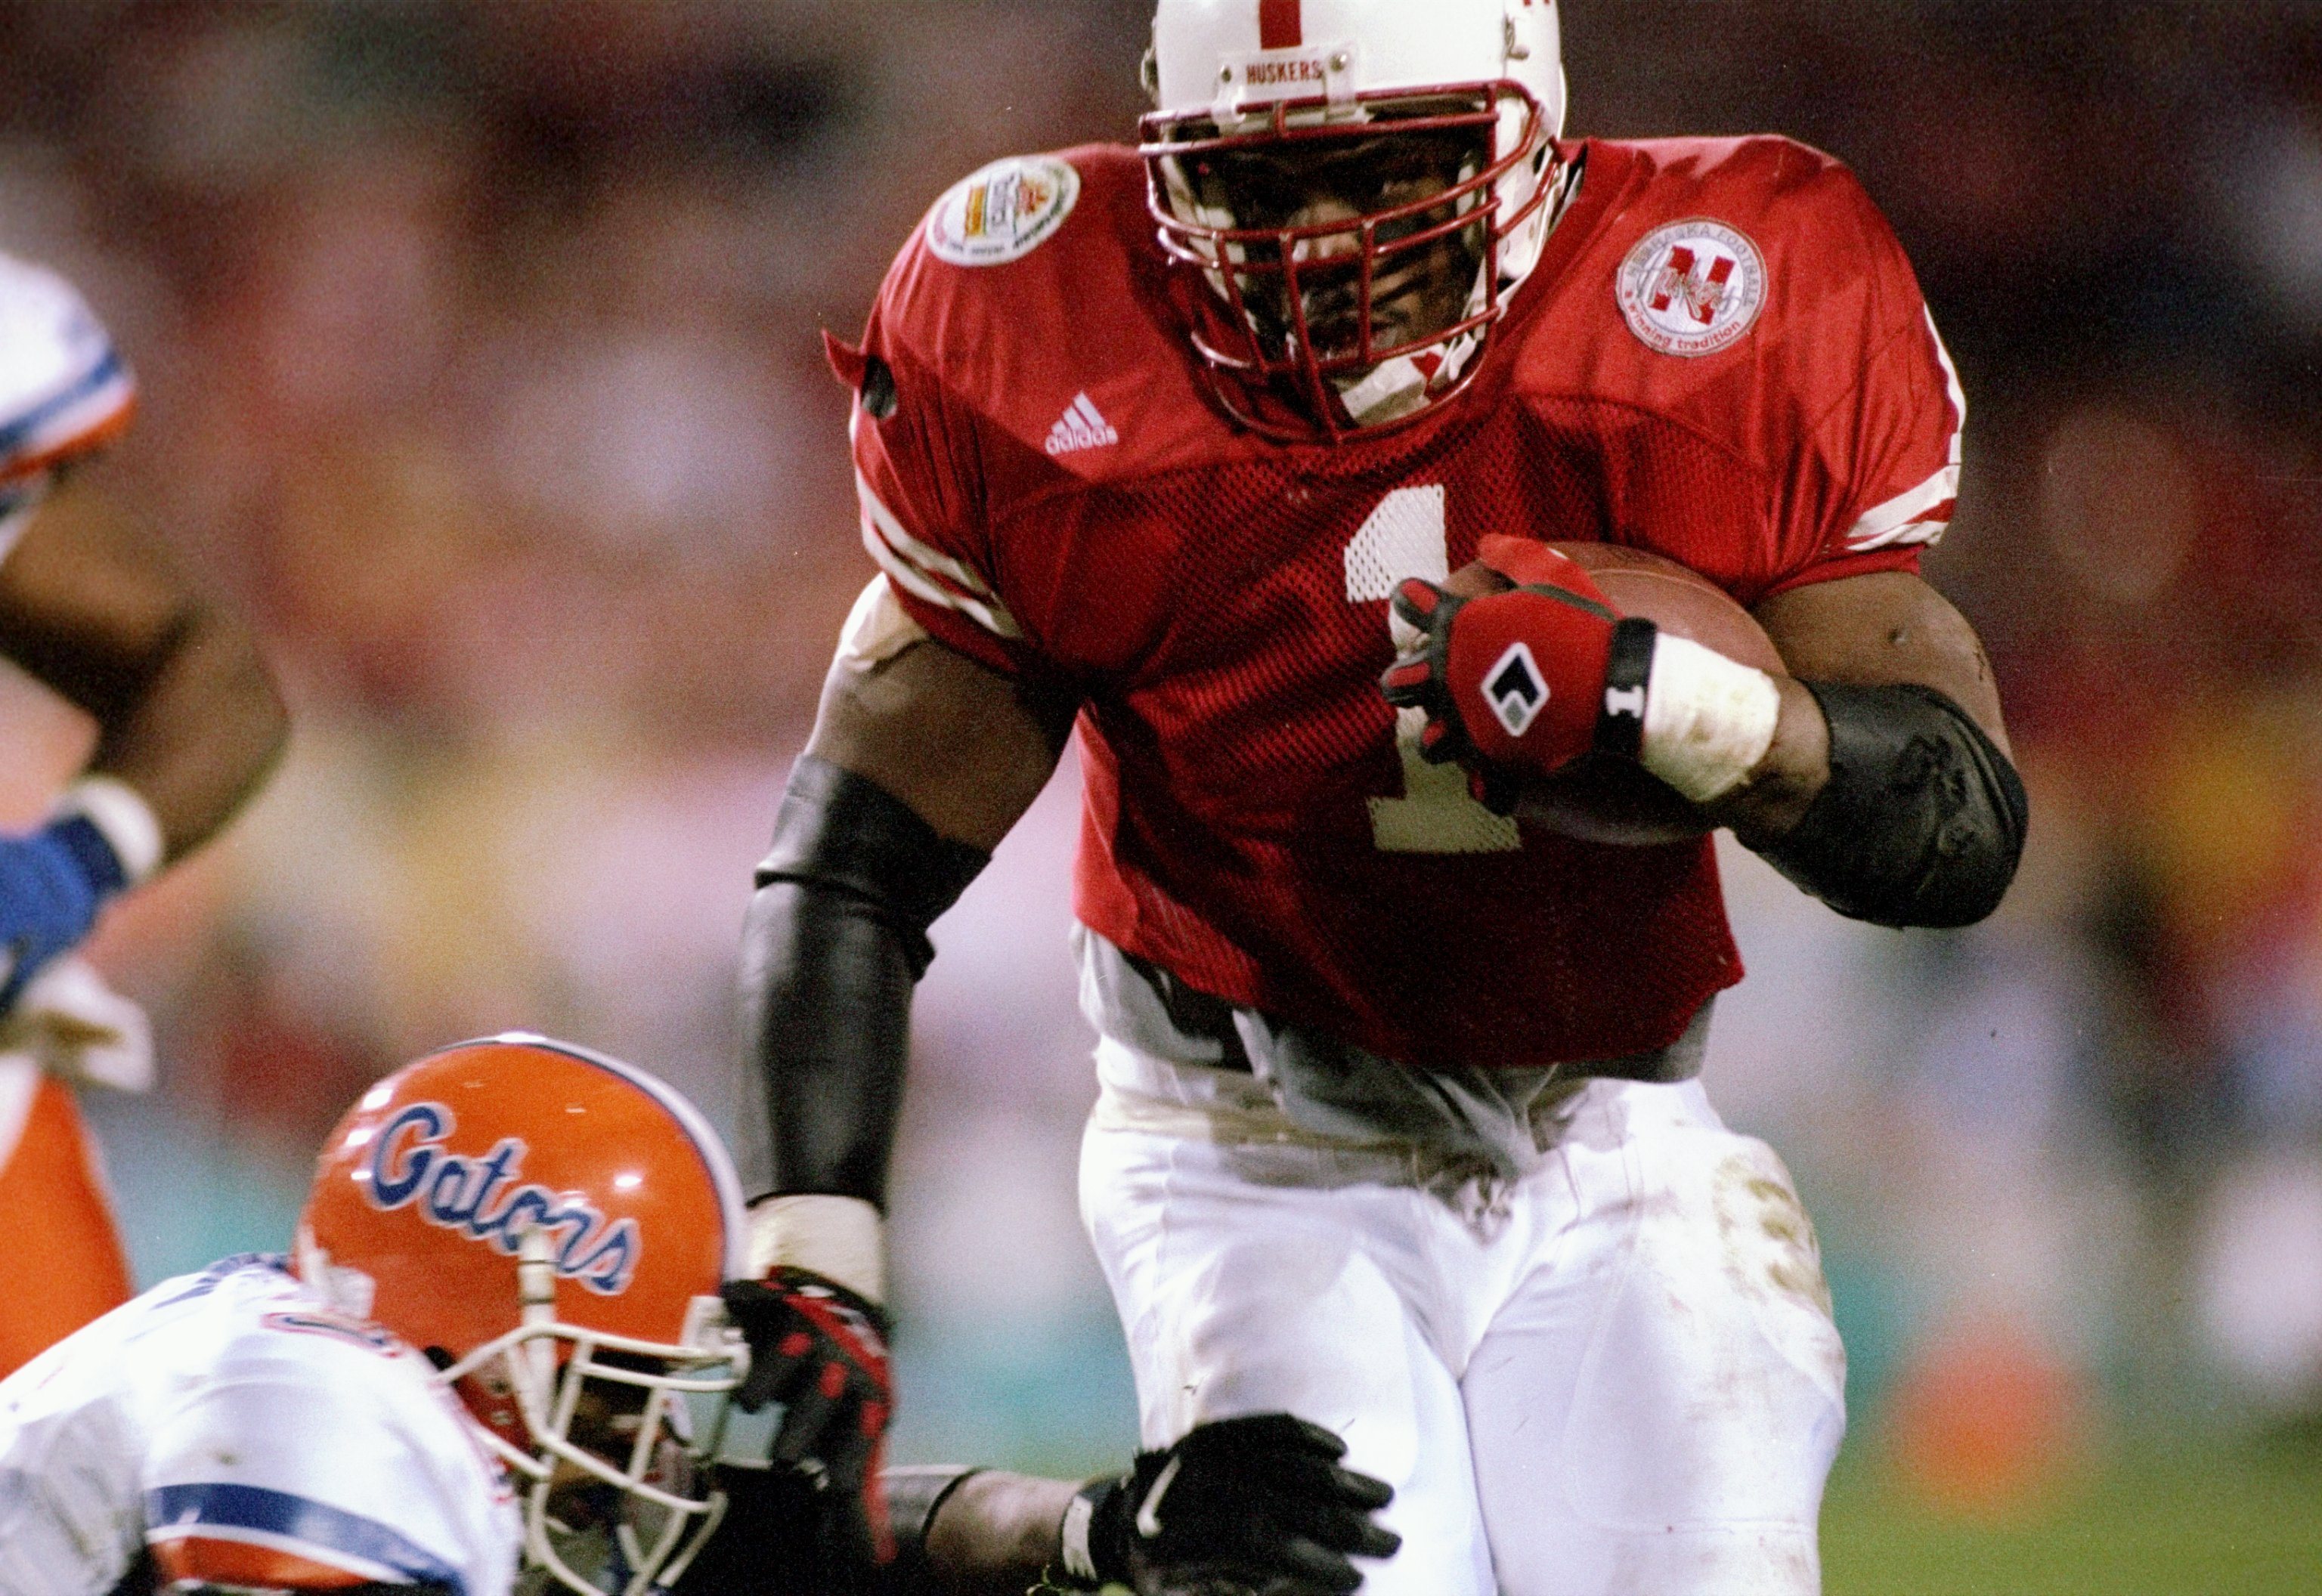 2 Jan 1996: Running back Lawrence Phillips of the Nebraska Cornhuskers runs with the ball during the Fiesta Bowl game against the Florida Gators at Sun Devil Stadium in Tempe, Arizona. Florida won the game 24-12.